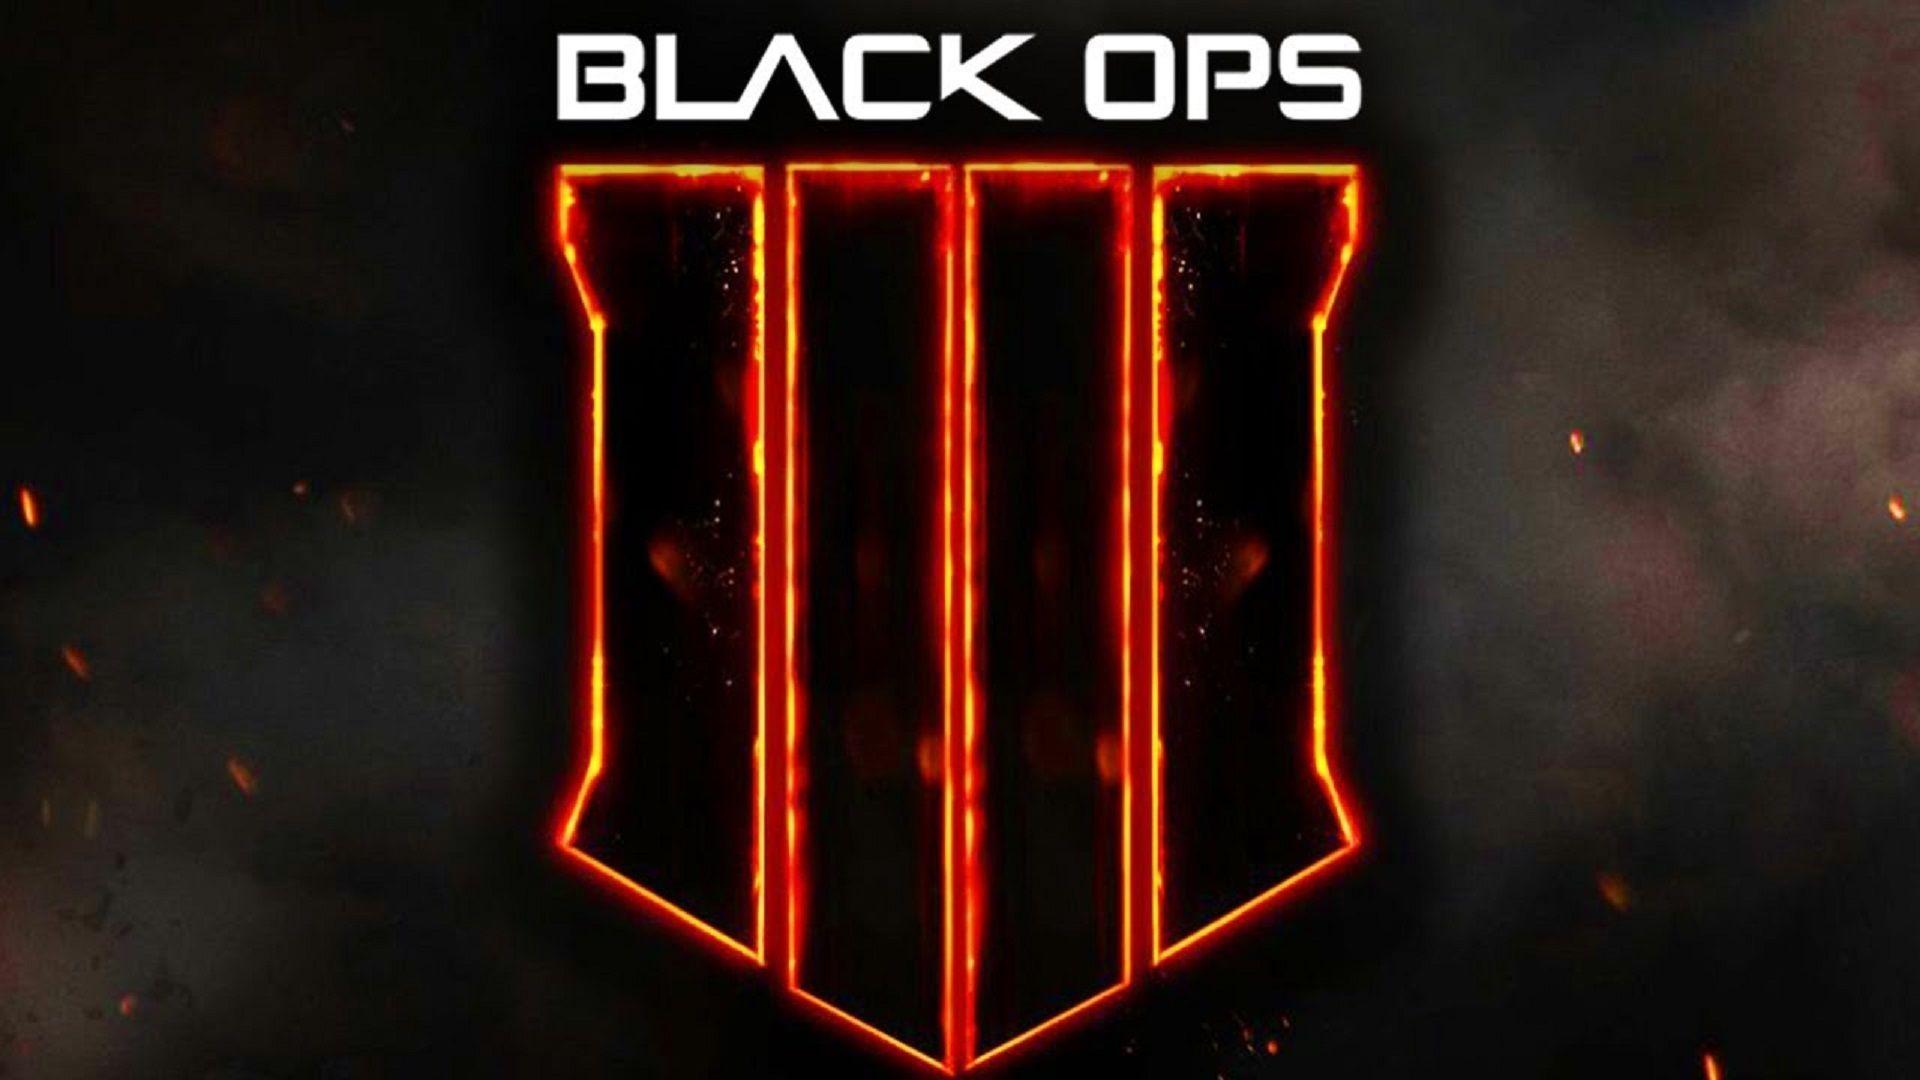 est call of duty black ops 4 background